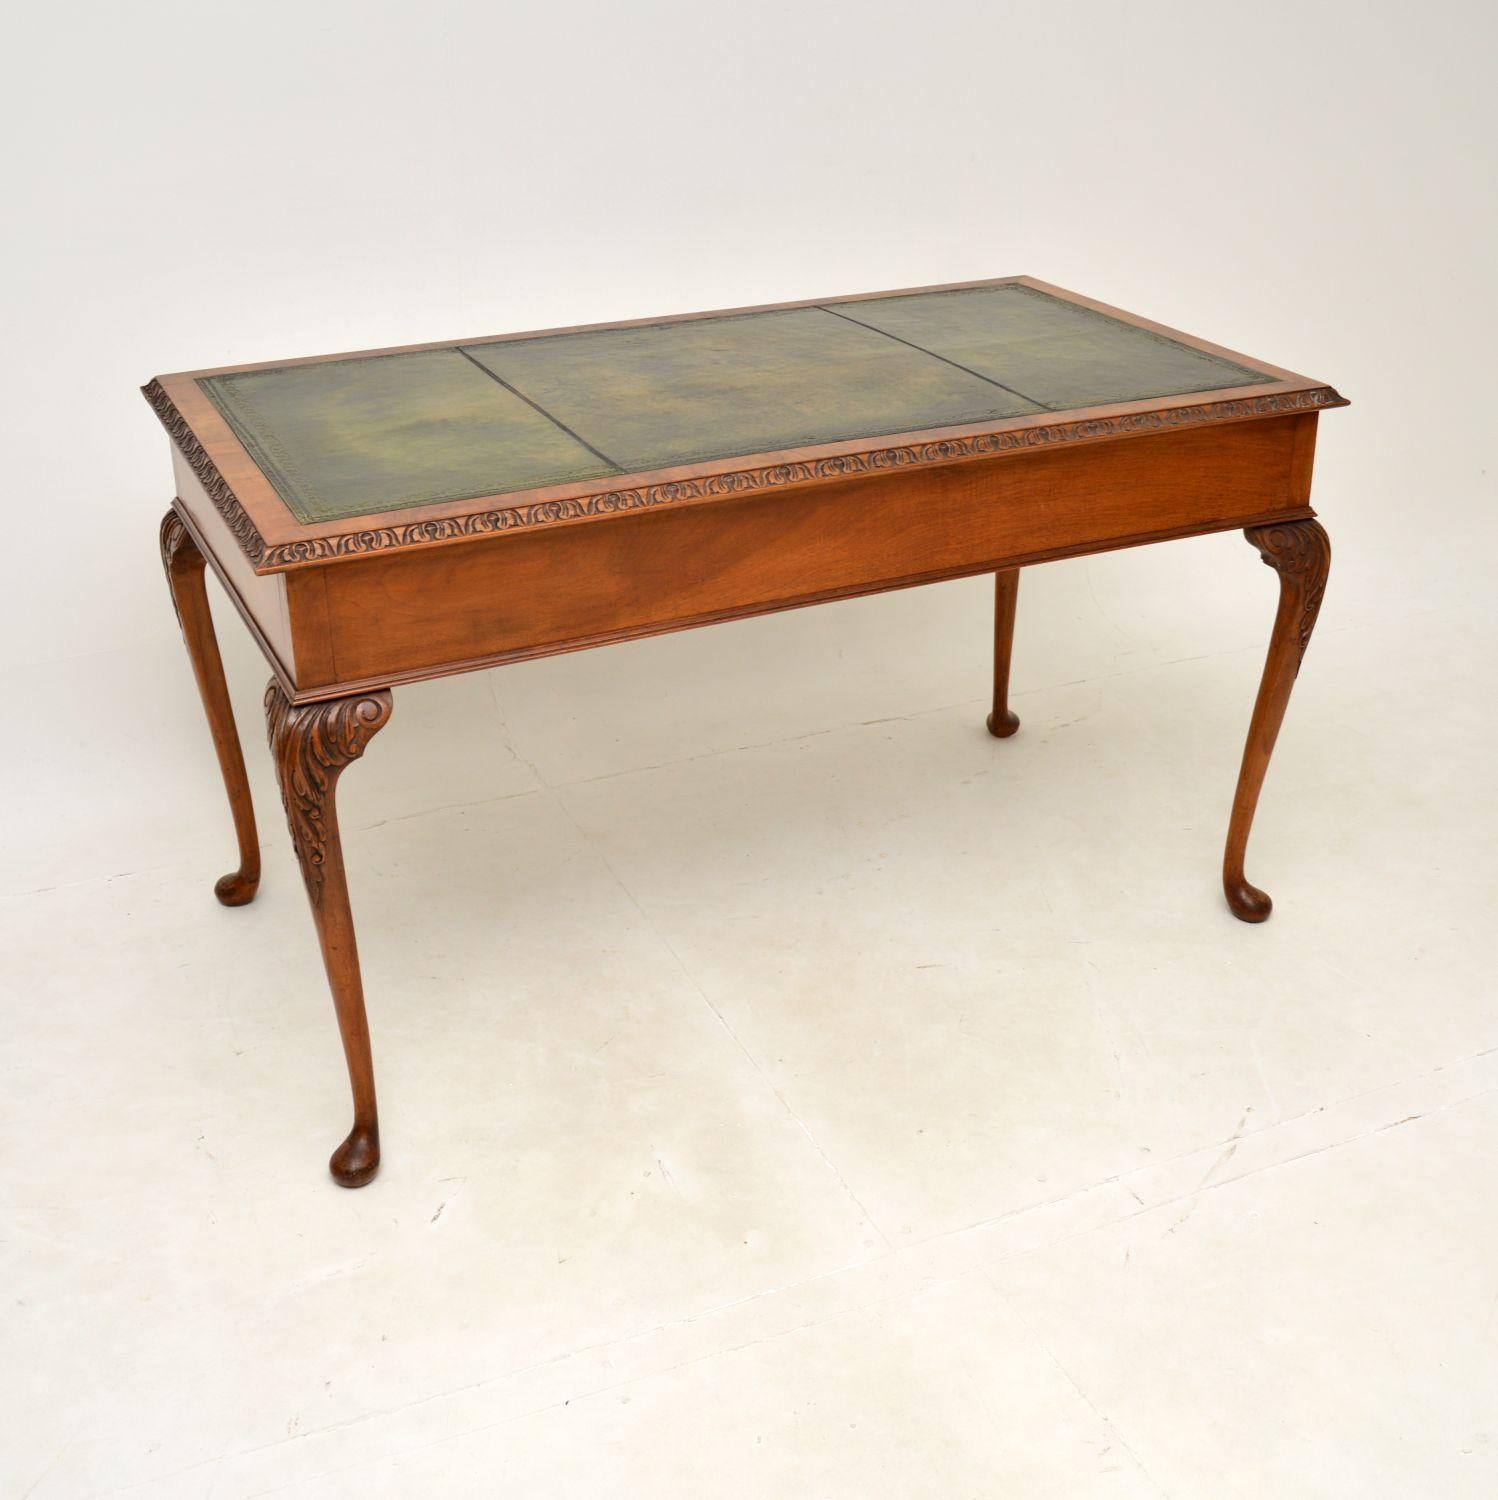 Antique Burr Walnut Leather Top Desk / Writing Table In Good Condition For Sale In London, GB